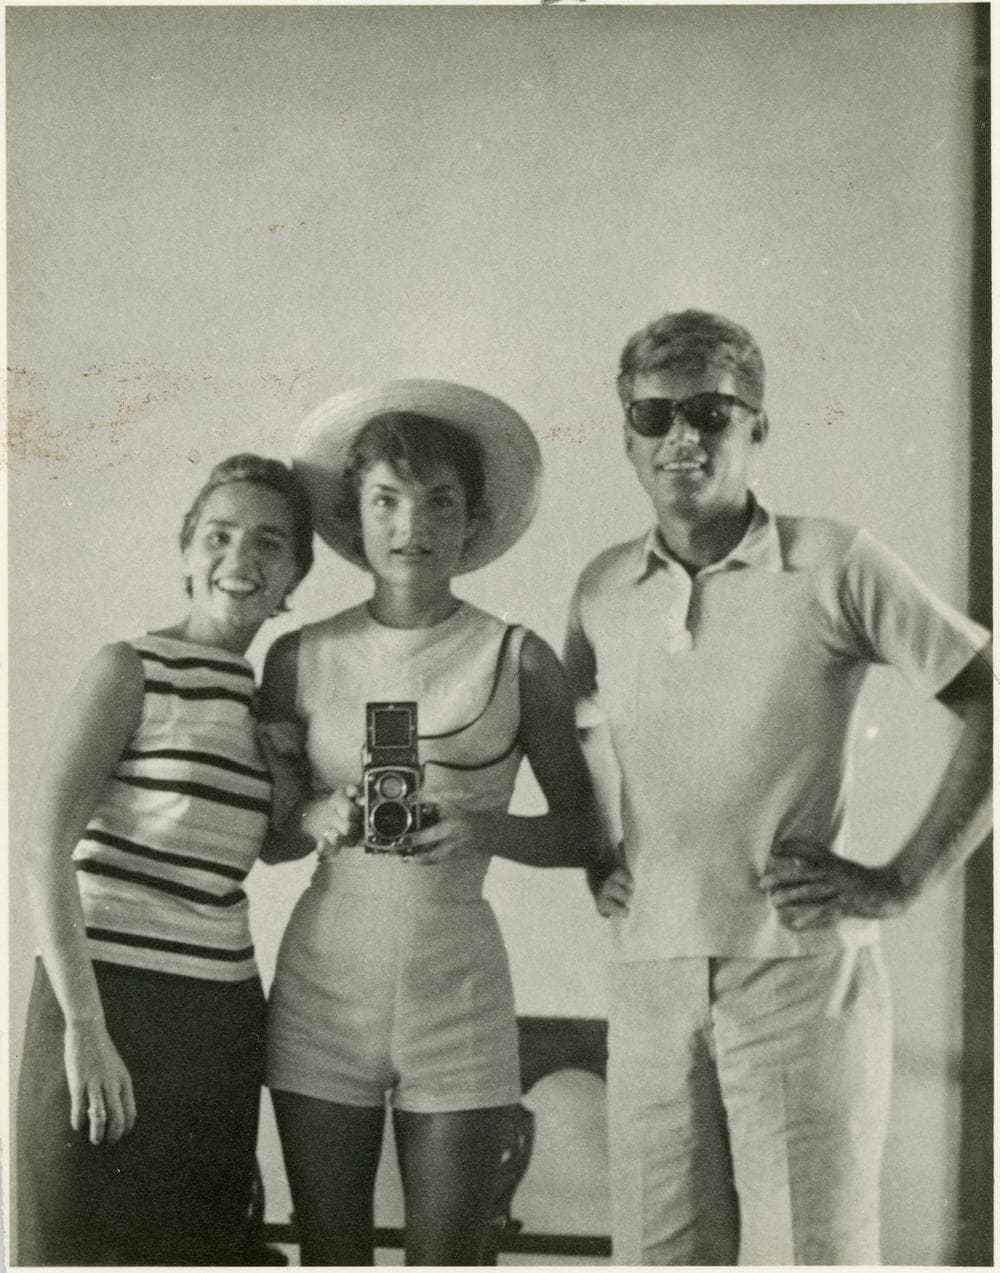 This undated photo provided by John McInnis Auctioneers shows late President John F. Kennedy, right, with his wife, Jacqueline, center, and sister-in-law Ethyl Kennedy, left. The photograph is among items to be auctioned on Sunday. (John McInnis Auctioneers/AP)